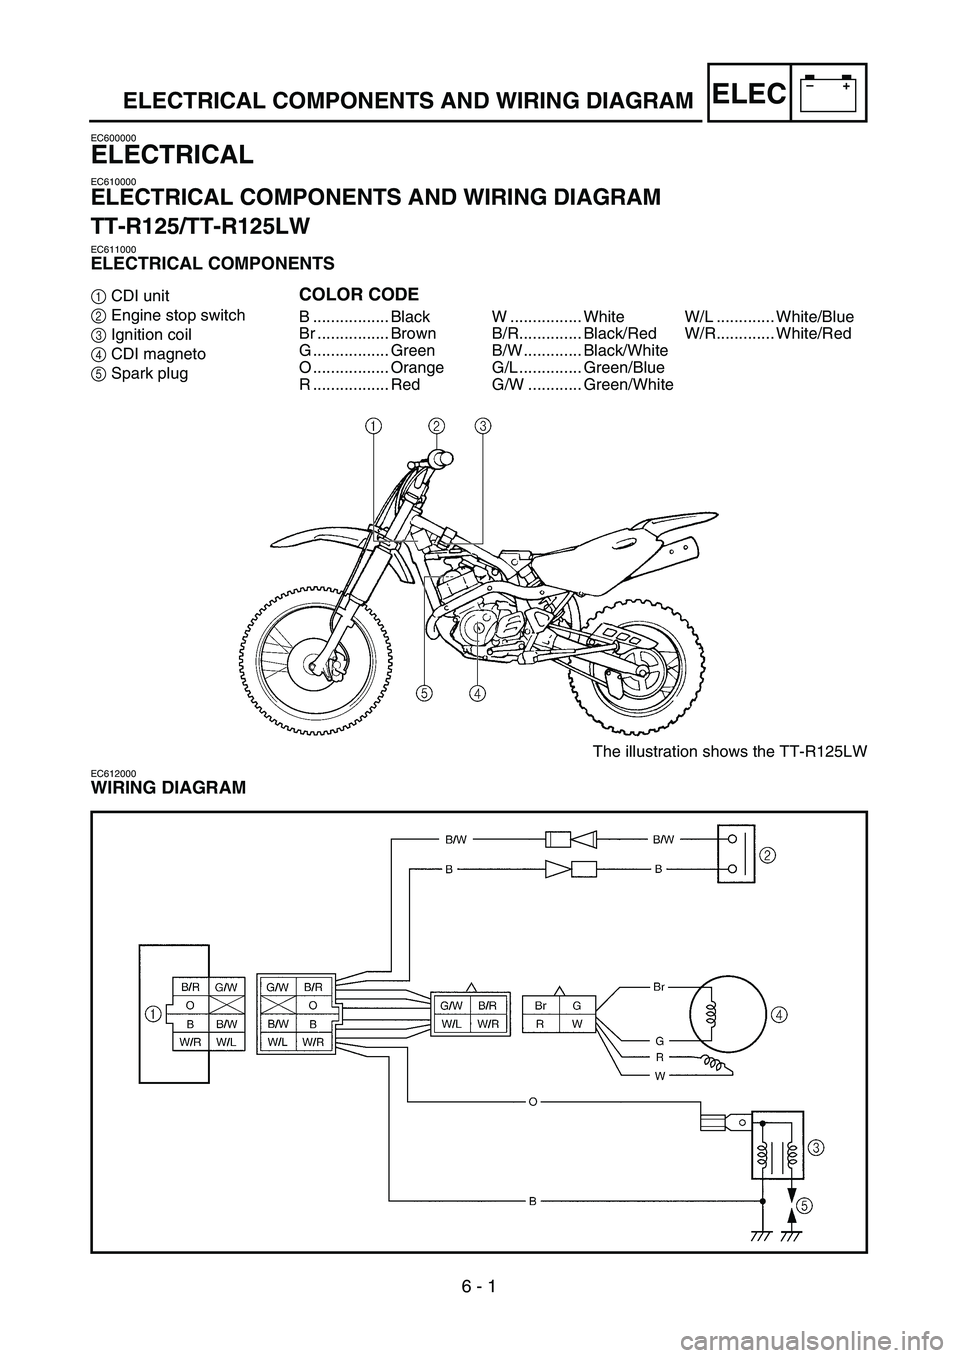 YAMAHA TTR125 2004  Betriebsanleitungen (in German) –+ELEC
6 - 1
ELECTRICAL COMPONENTS AND WIRING DIAGRAM
The illustration shows the TT-R125LW
EC600000
ELECTRICAL
EC610000
ELECTRICAL COMPONENTS AND WIRING DIAGRAM
TT-R125/TT-R125LW
EC611000
ELECTRICAL